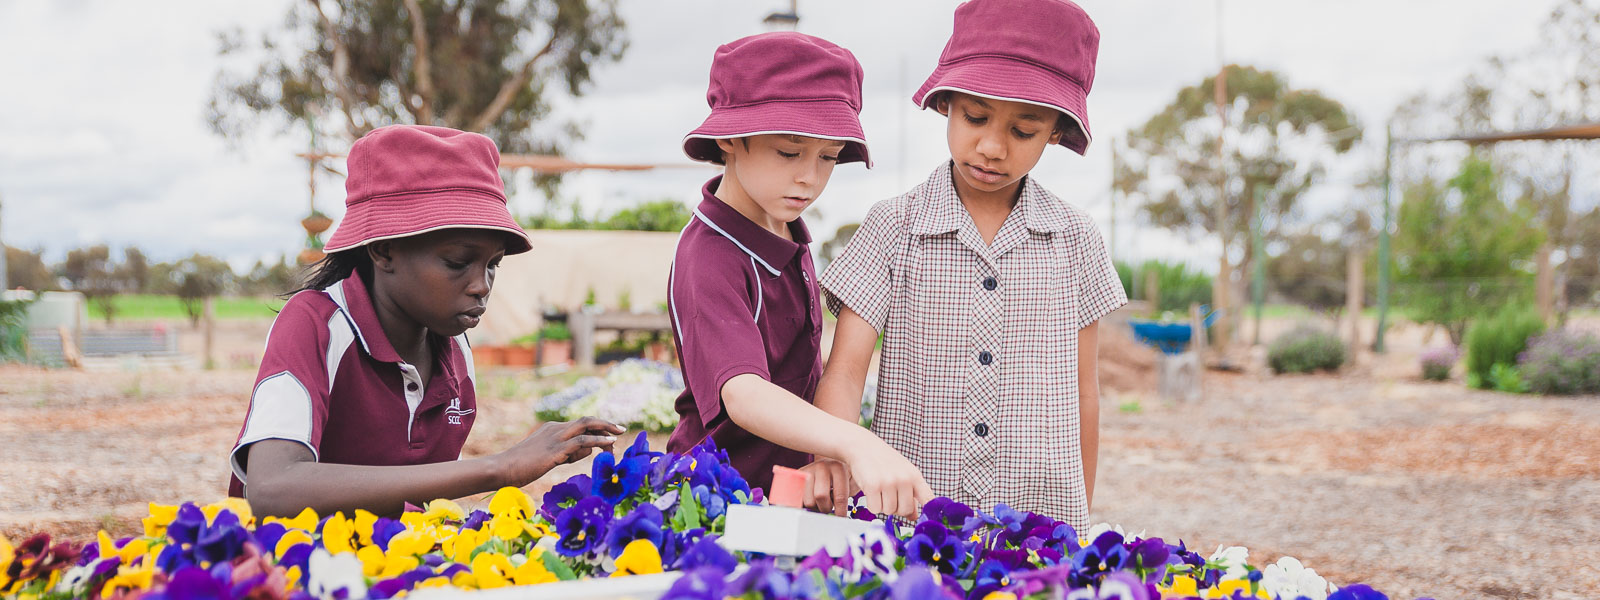 Review of Qld Non-State School Accreditation Framework